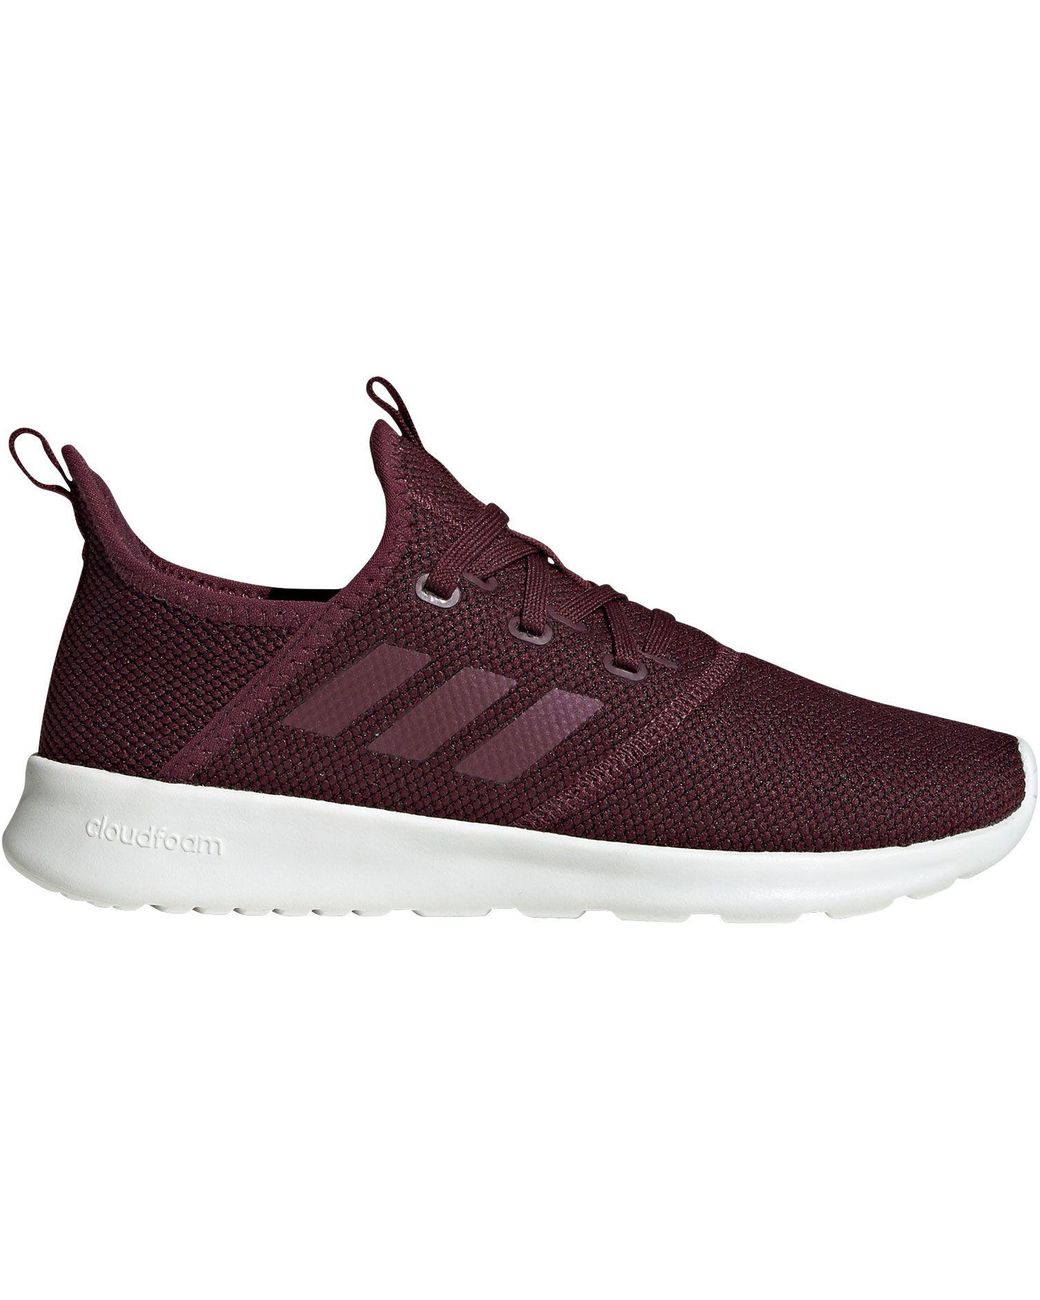 adidas Cloudfoam Pure Shoes in Maroon/White (Purple) - Lyst